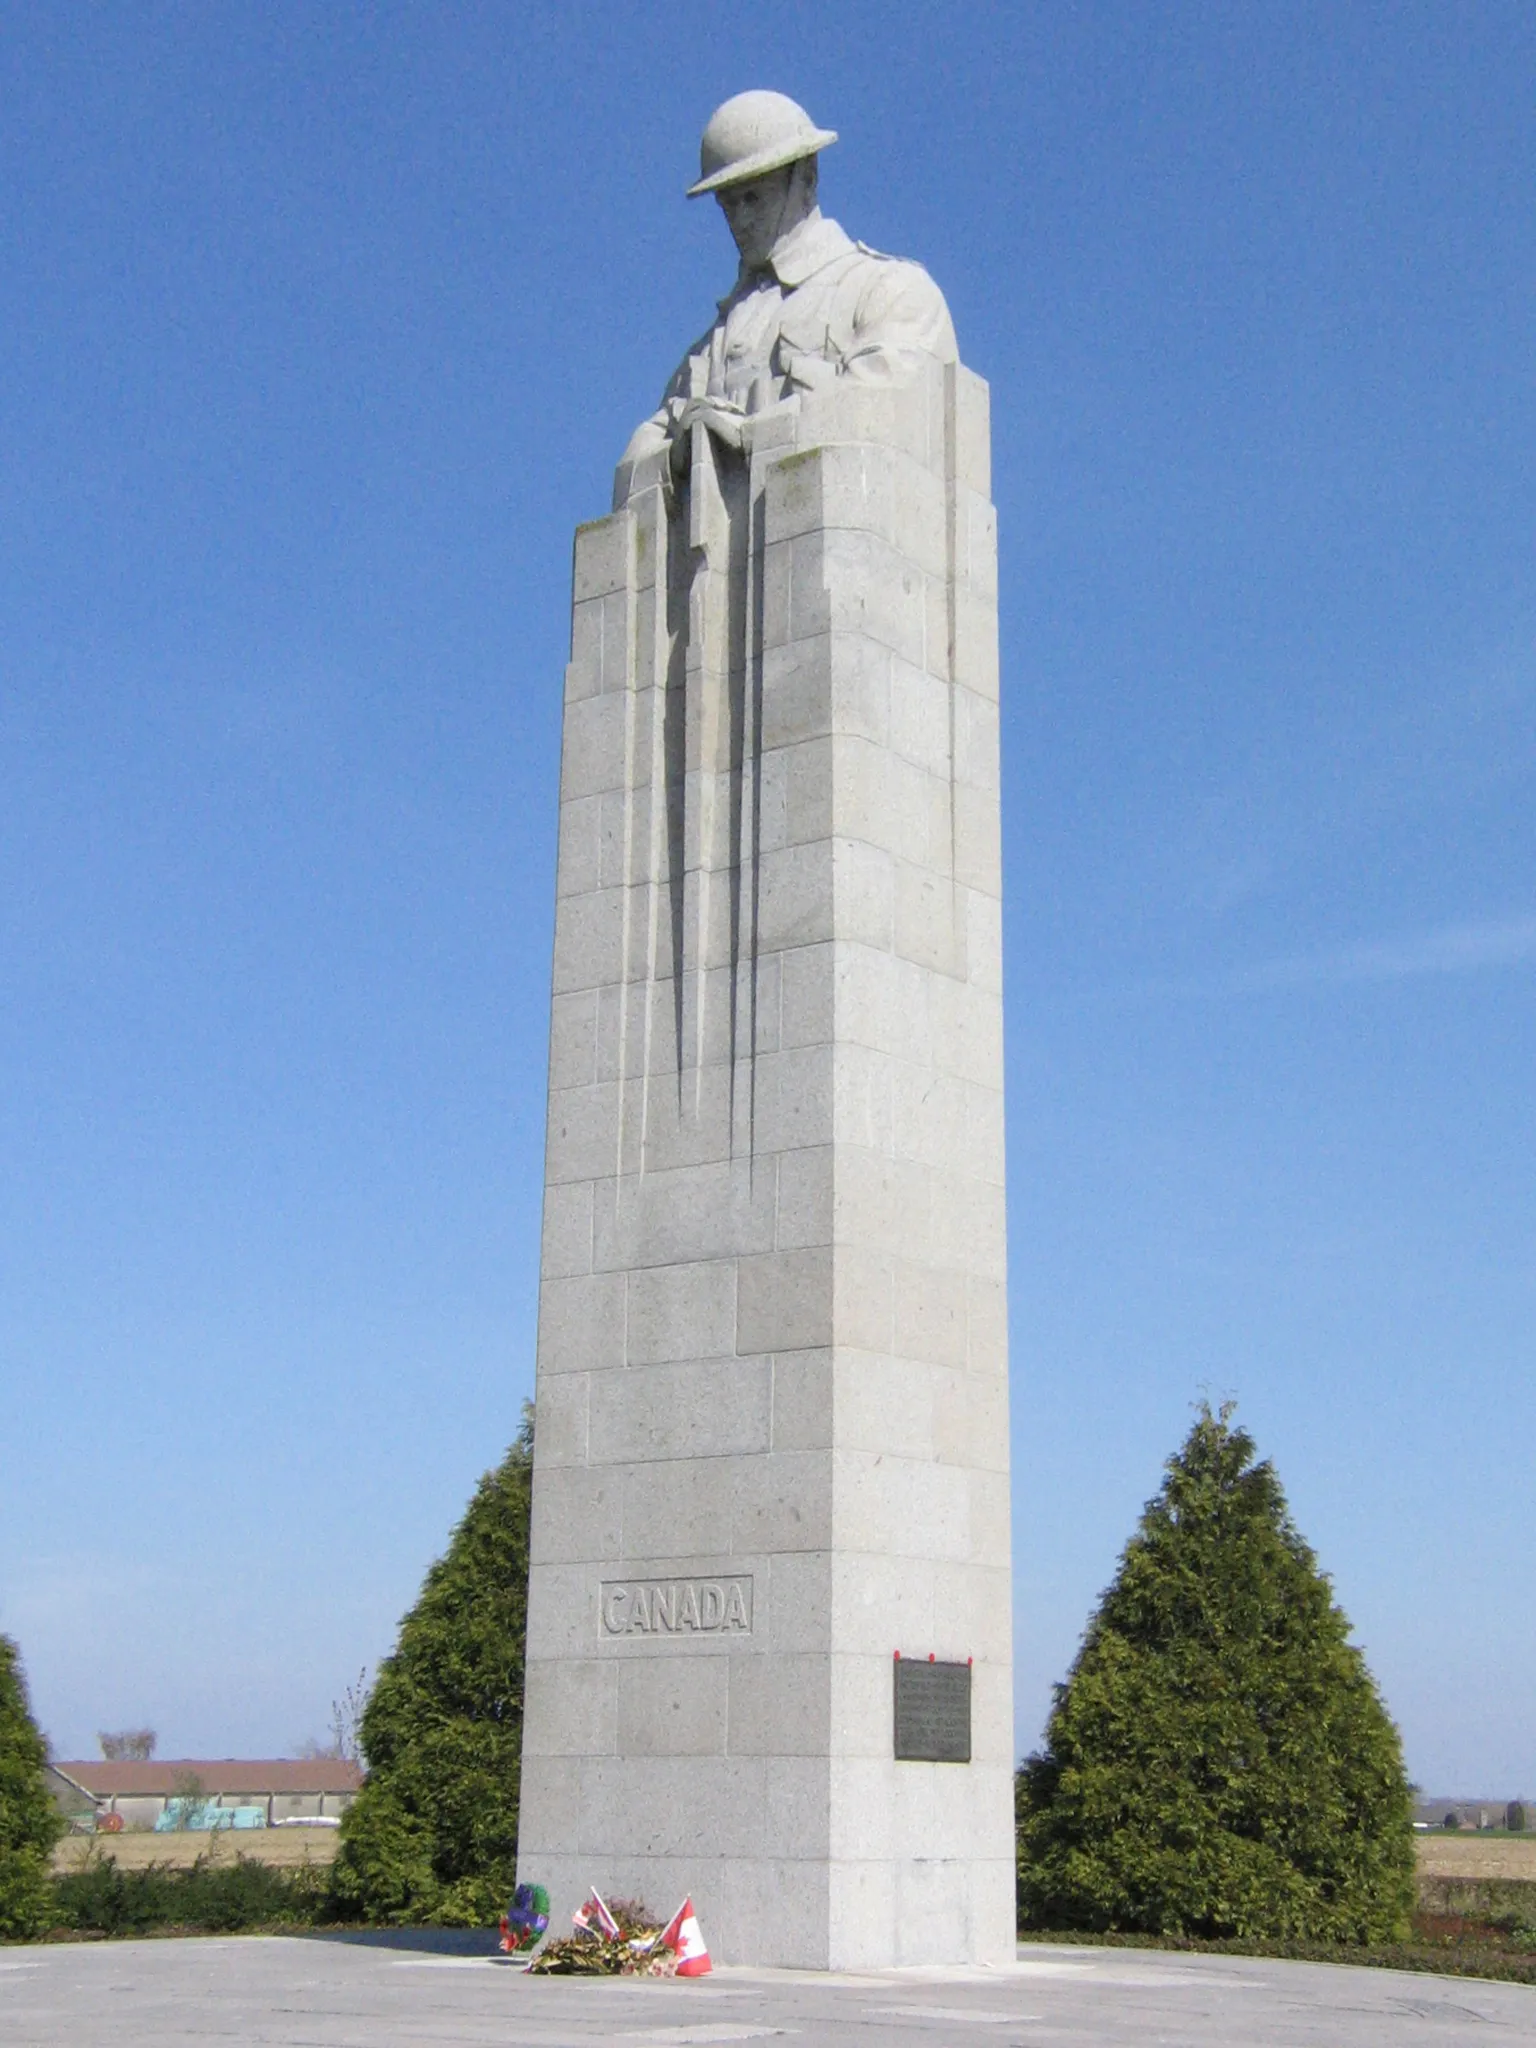 Photo showing: A image of the Saint Julien Memorial in Belgium I took in 2007 showing the front and sides of the memorial.